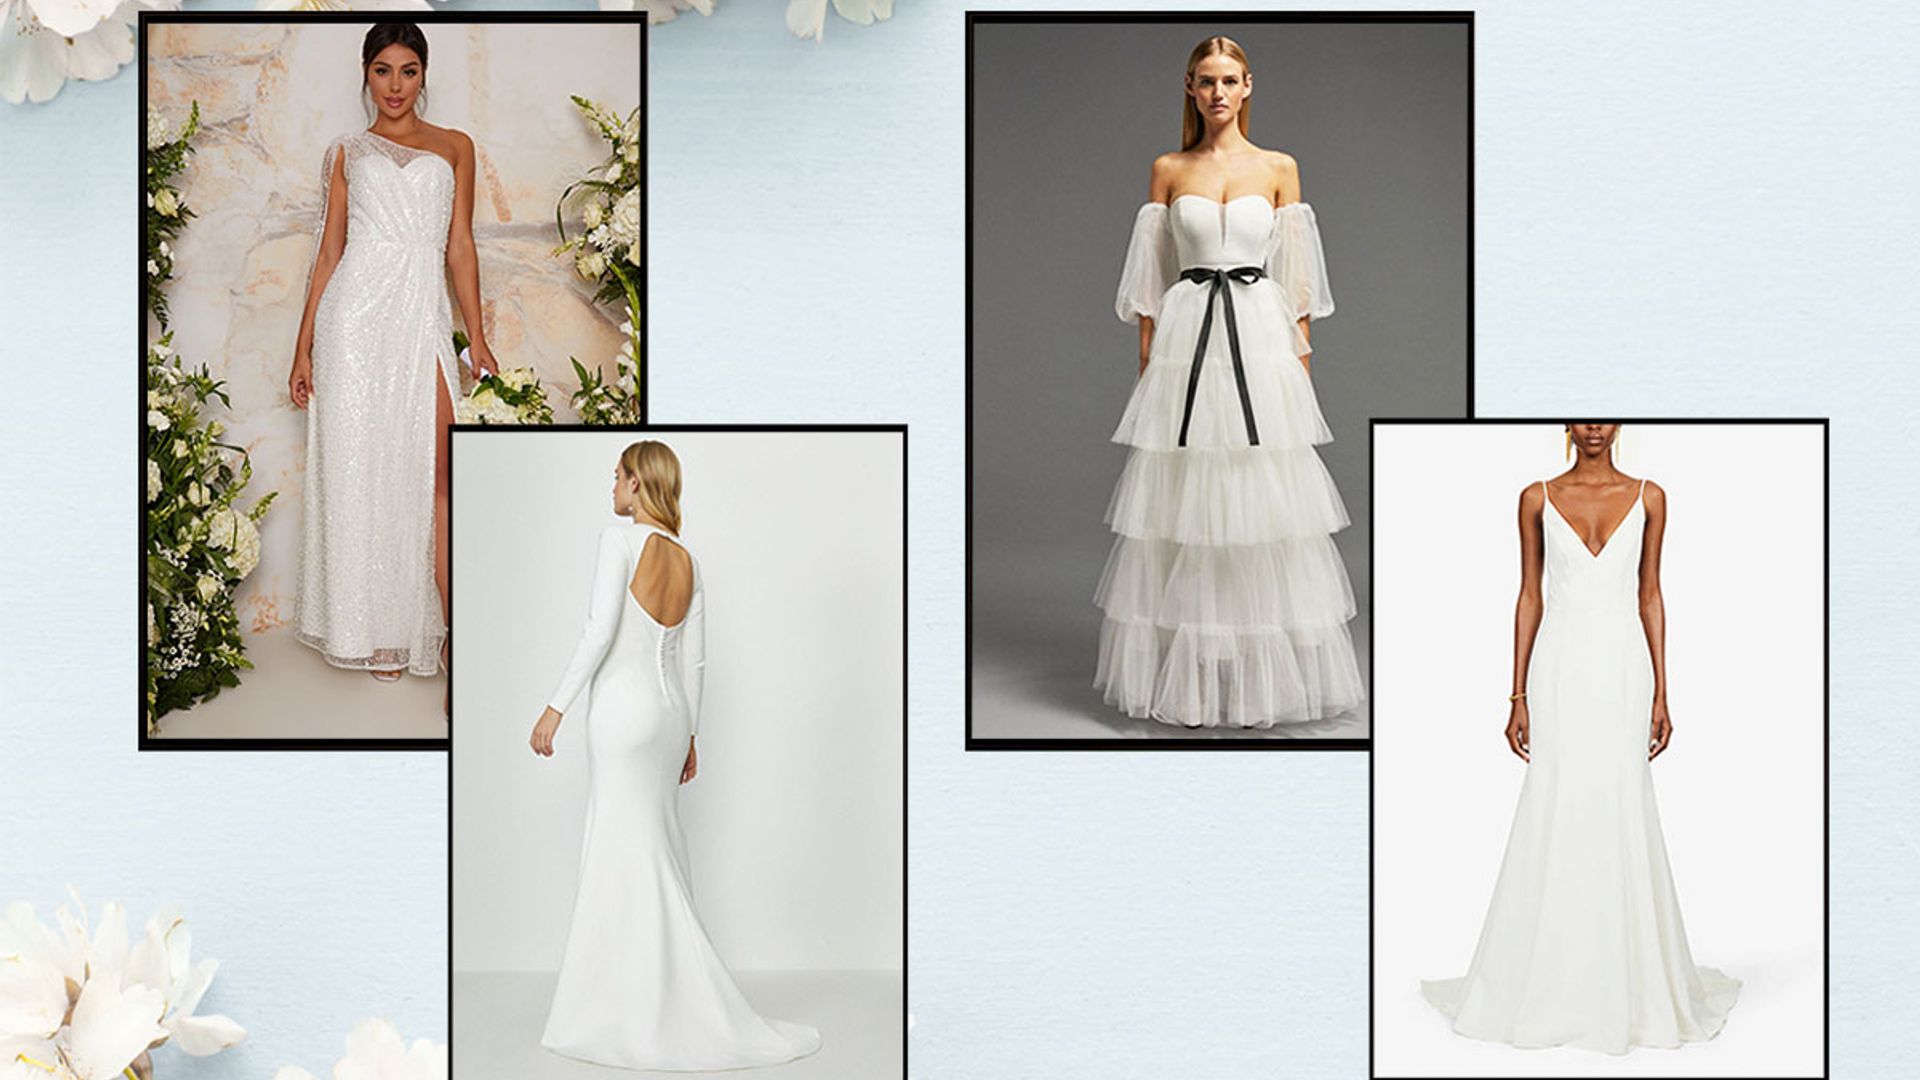 10 discounted wedding dresses in the January sales